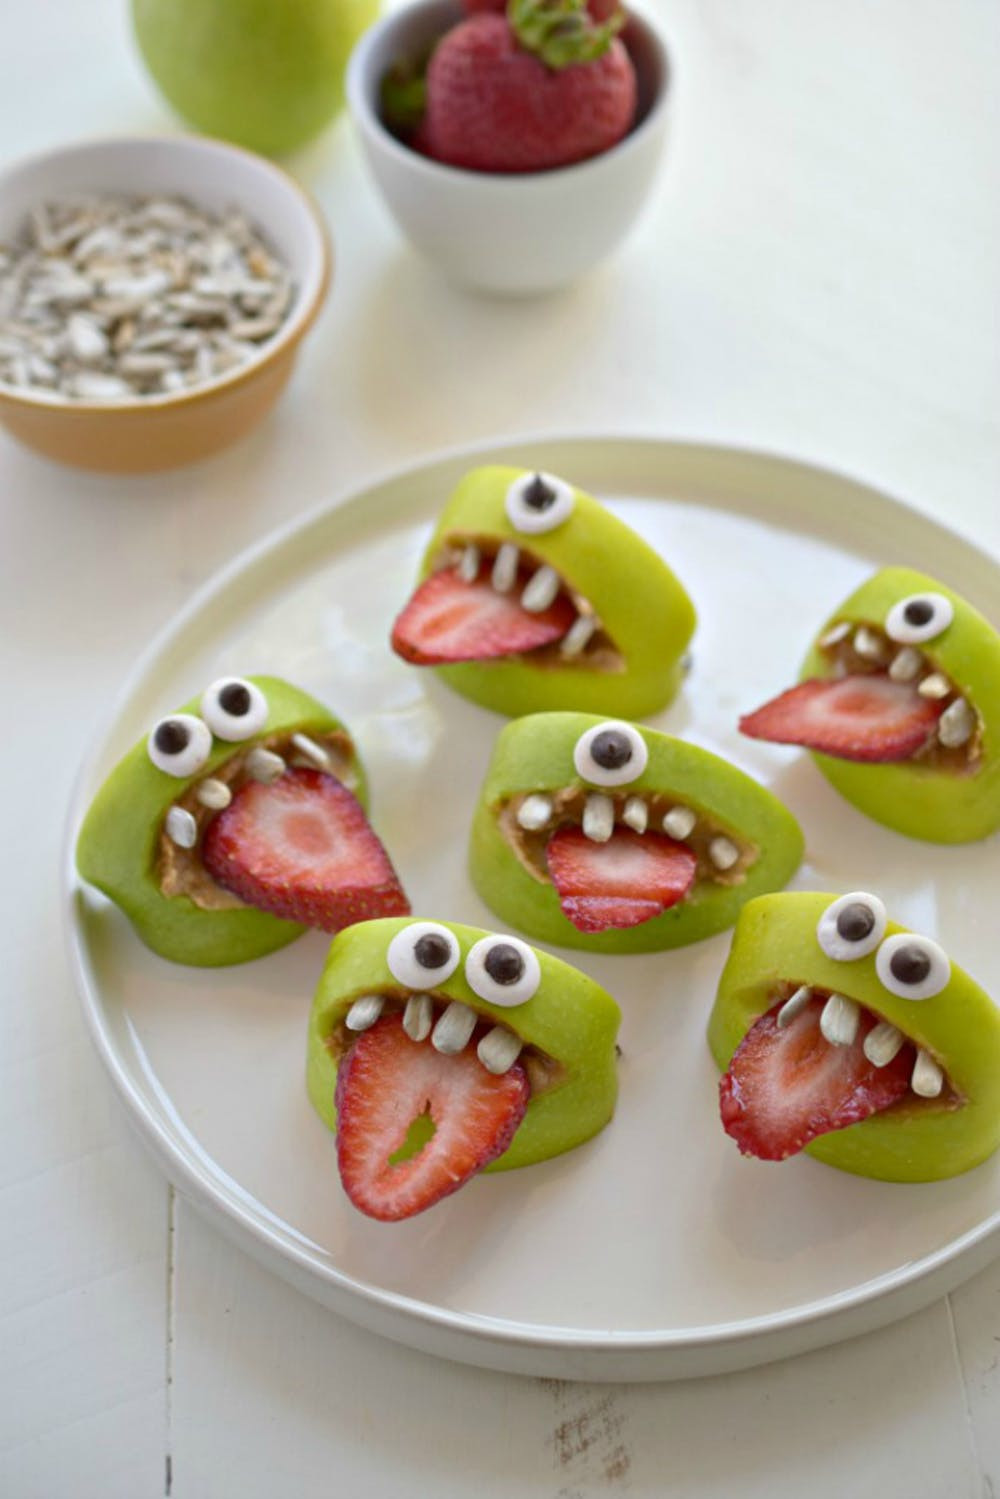 Halloween Party Food Ideas For Adults
 Halloween Food Ideas 2019 With Download Daily SMS